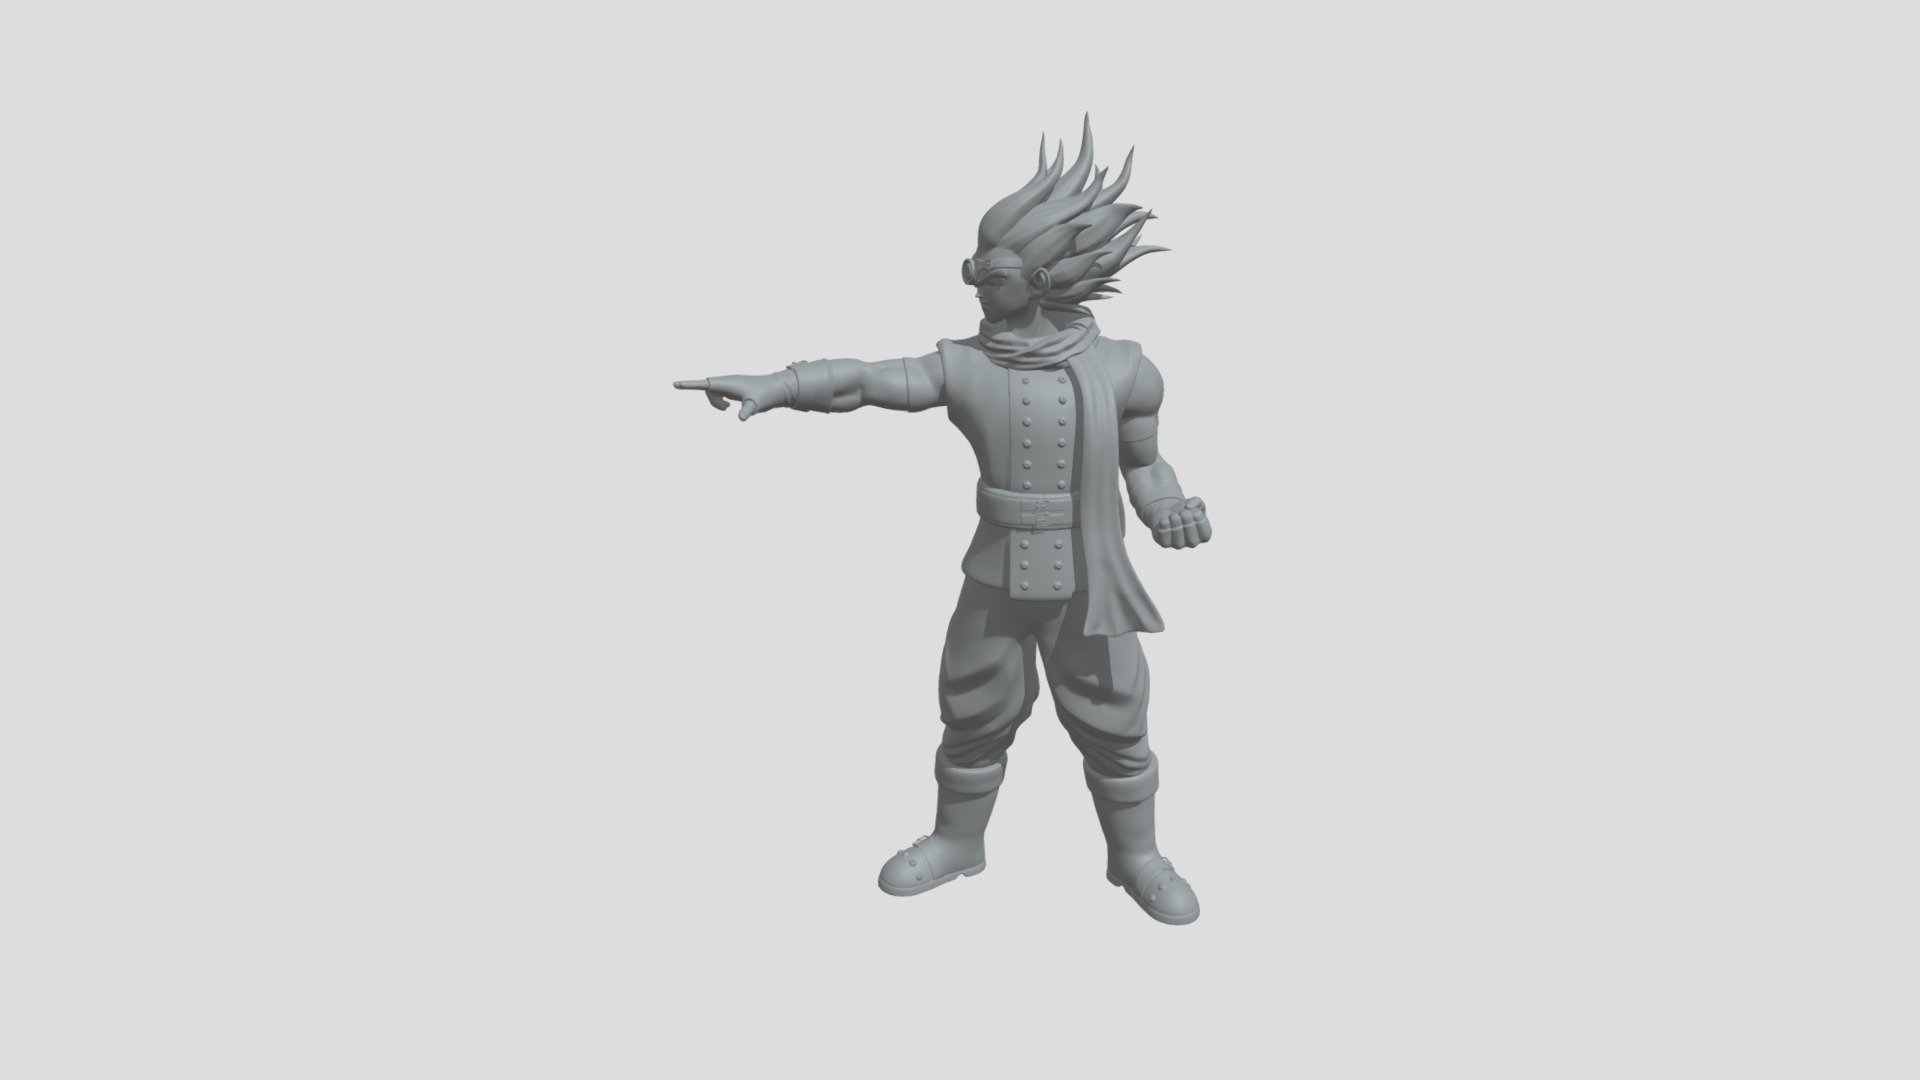 This is my model of dragon ball super Granola sculpted in zbrush

Paulbridgepbrd7@gmail.com - dragon ball Granola - 3D model by paulbridgepbrd7 3d model